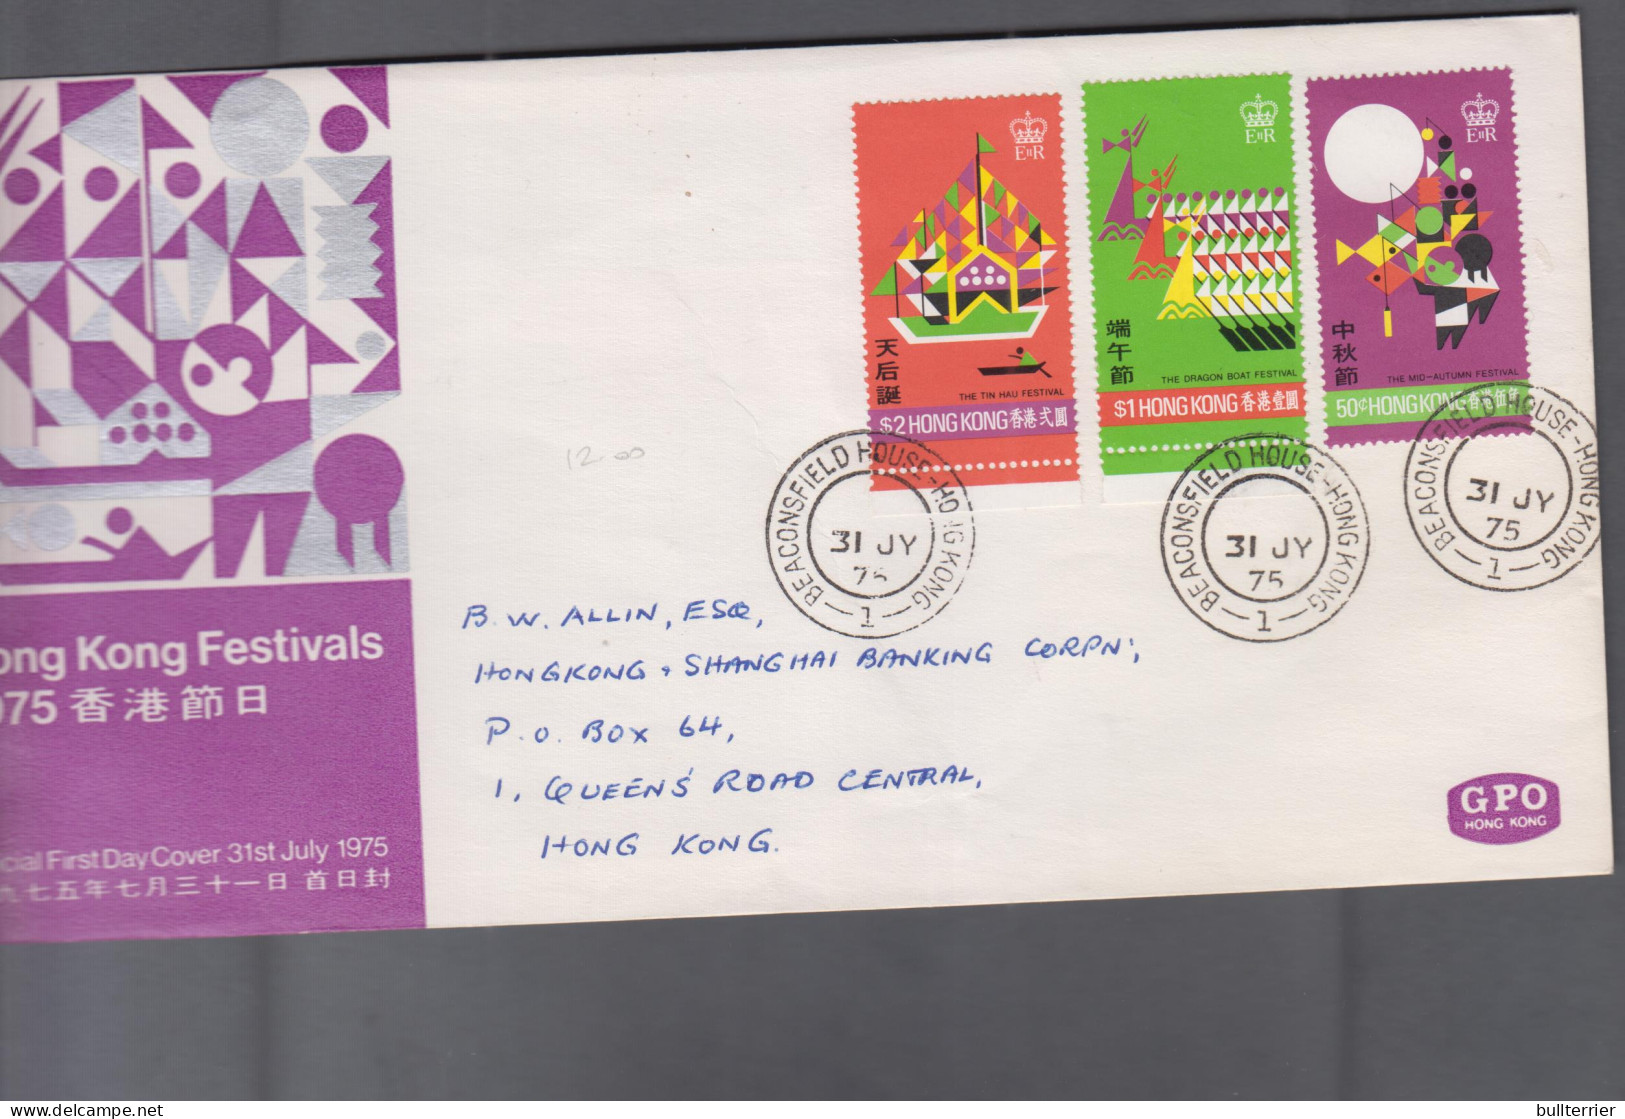 HONG KONG - 1975 - HONG KONG FESTIVALS SET OF 3 ON FDC,  SG CAT £12.50+ AS USED STAMPS - Briefe U. Dokumente